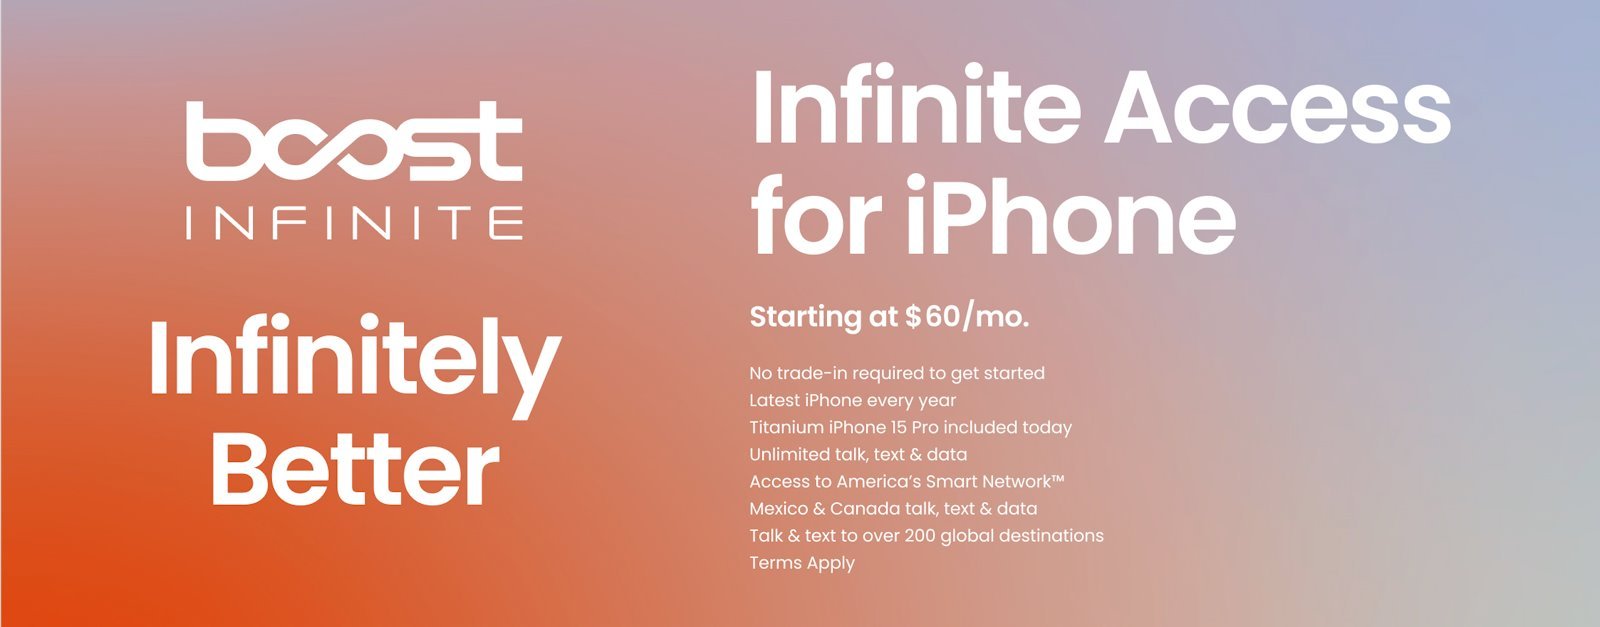 Boost Infinite Access for iPhone Plan Details Image